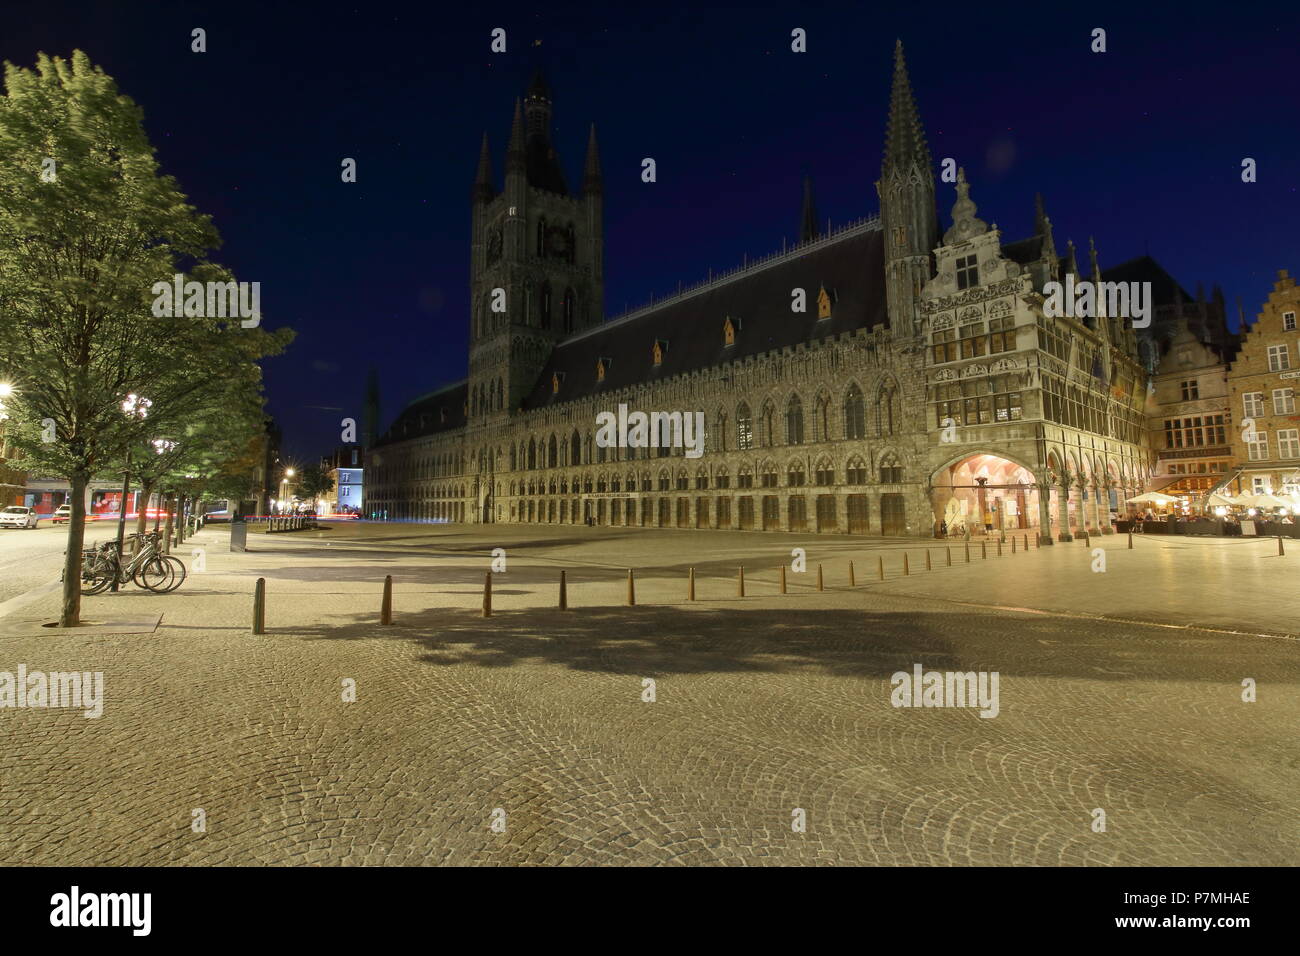 Panno Ypres Hall di notte Foto Stock